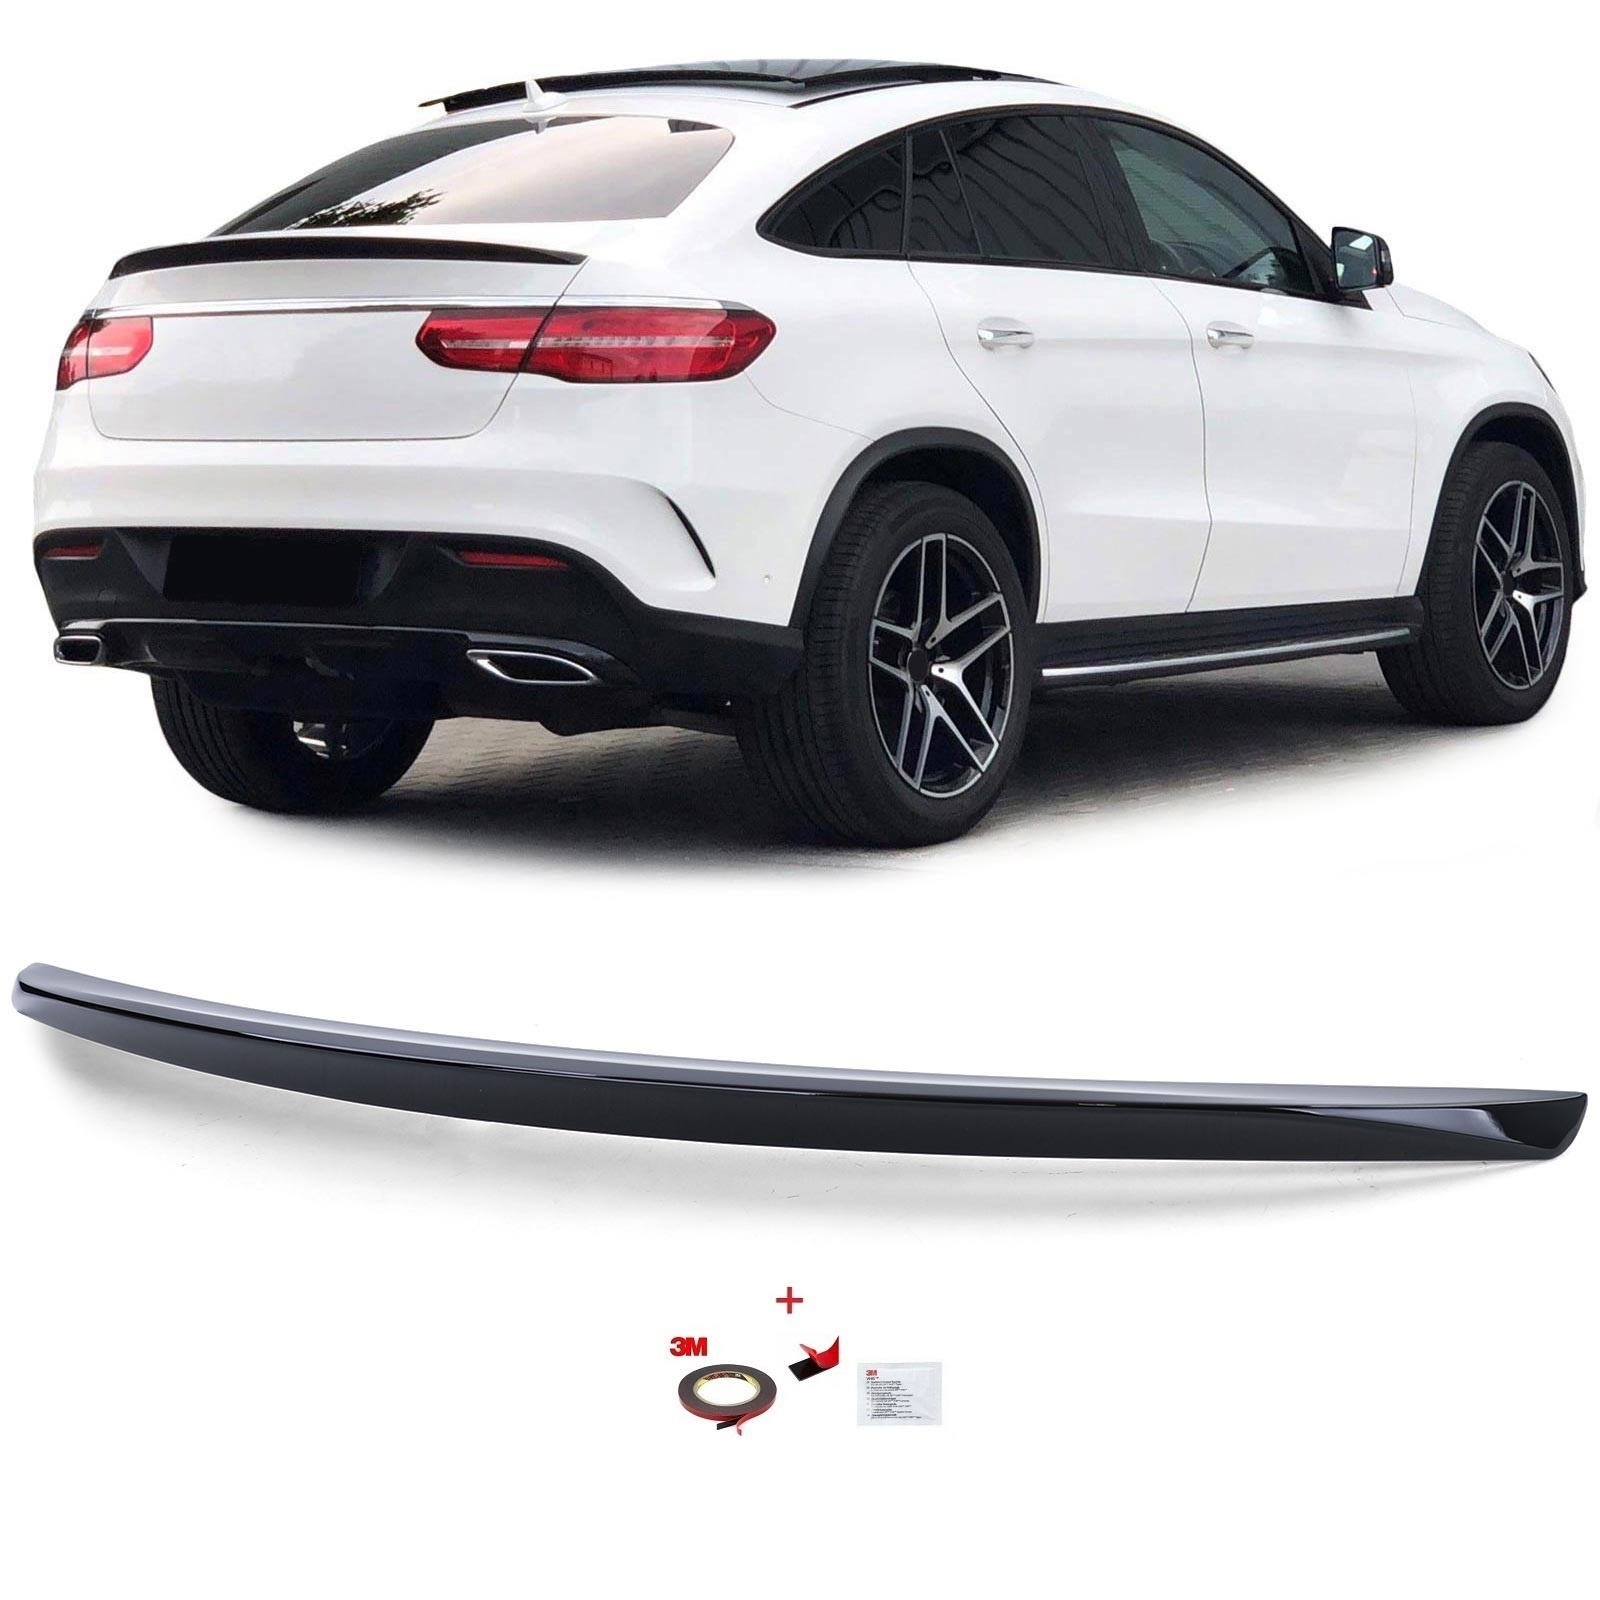 3M Double-sided Tape for Auto Tuning & Spoilers 